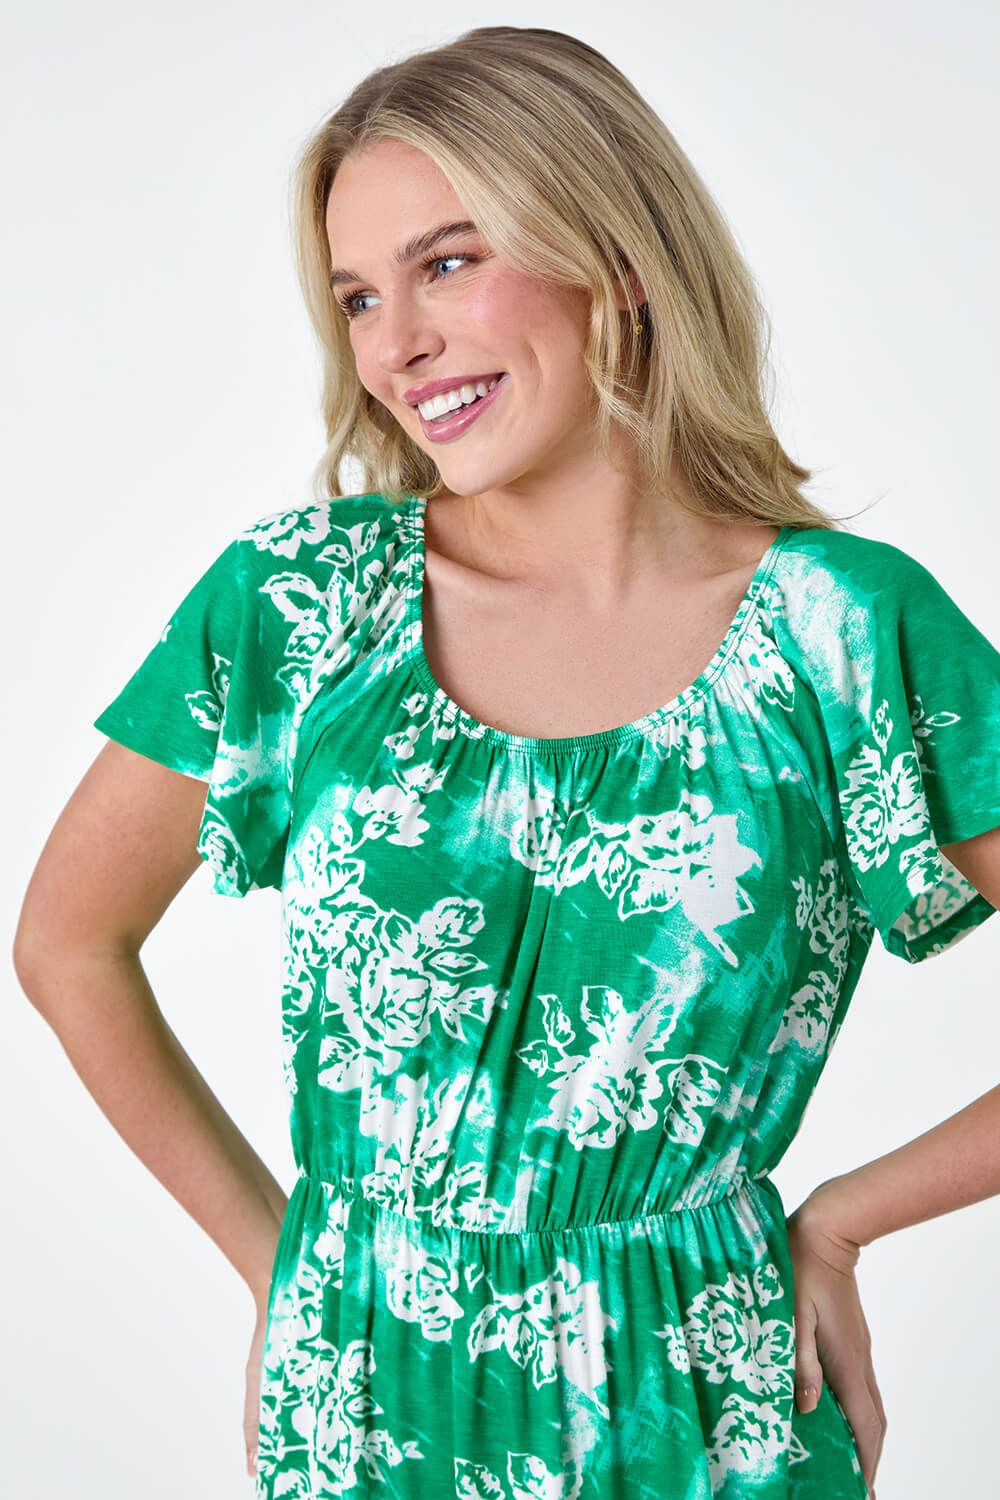 Green Petite Abstract Floral Stretch Frill Dress, Image 4 of 5